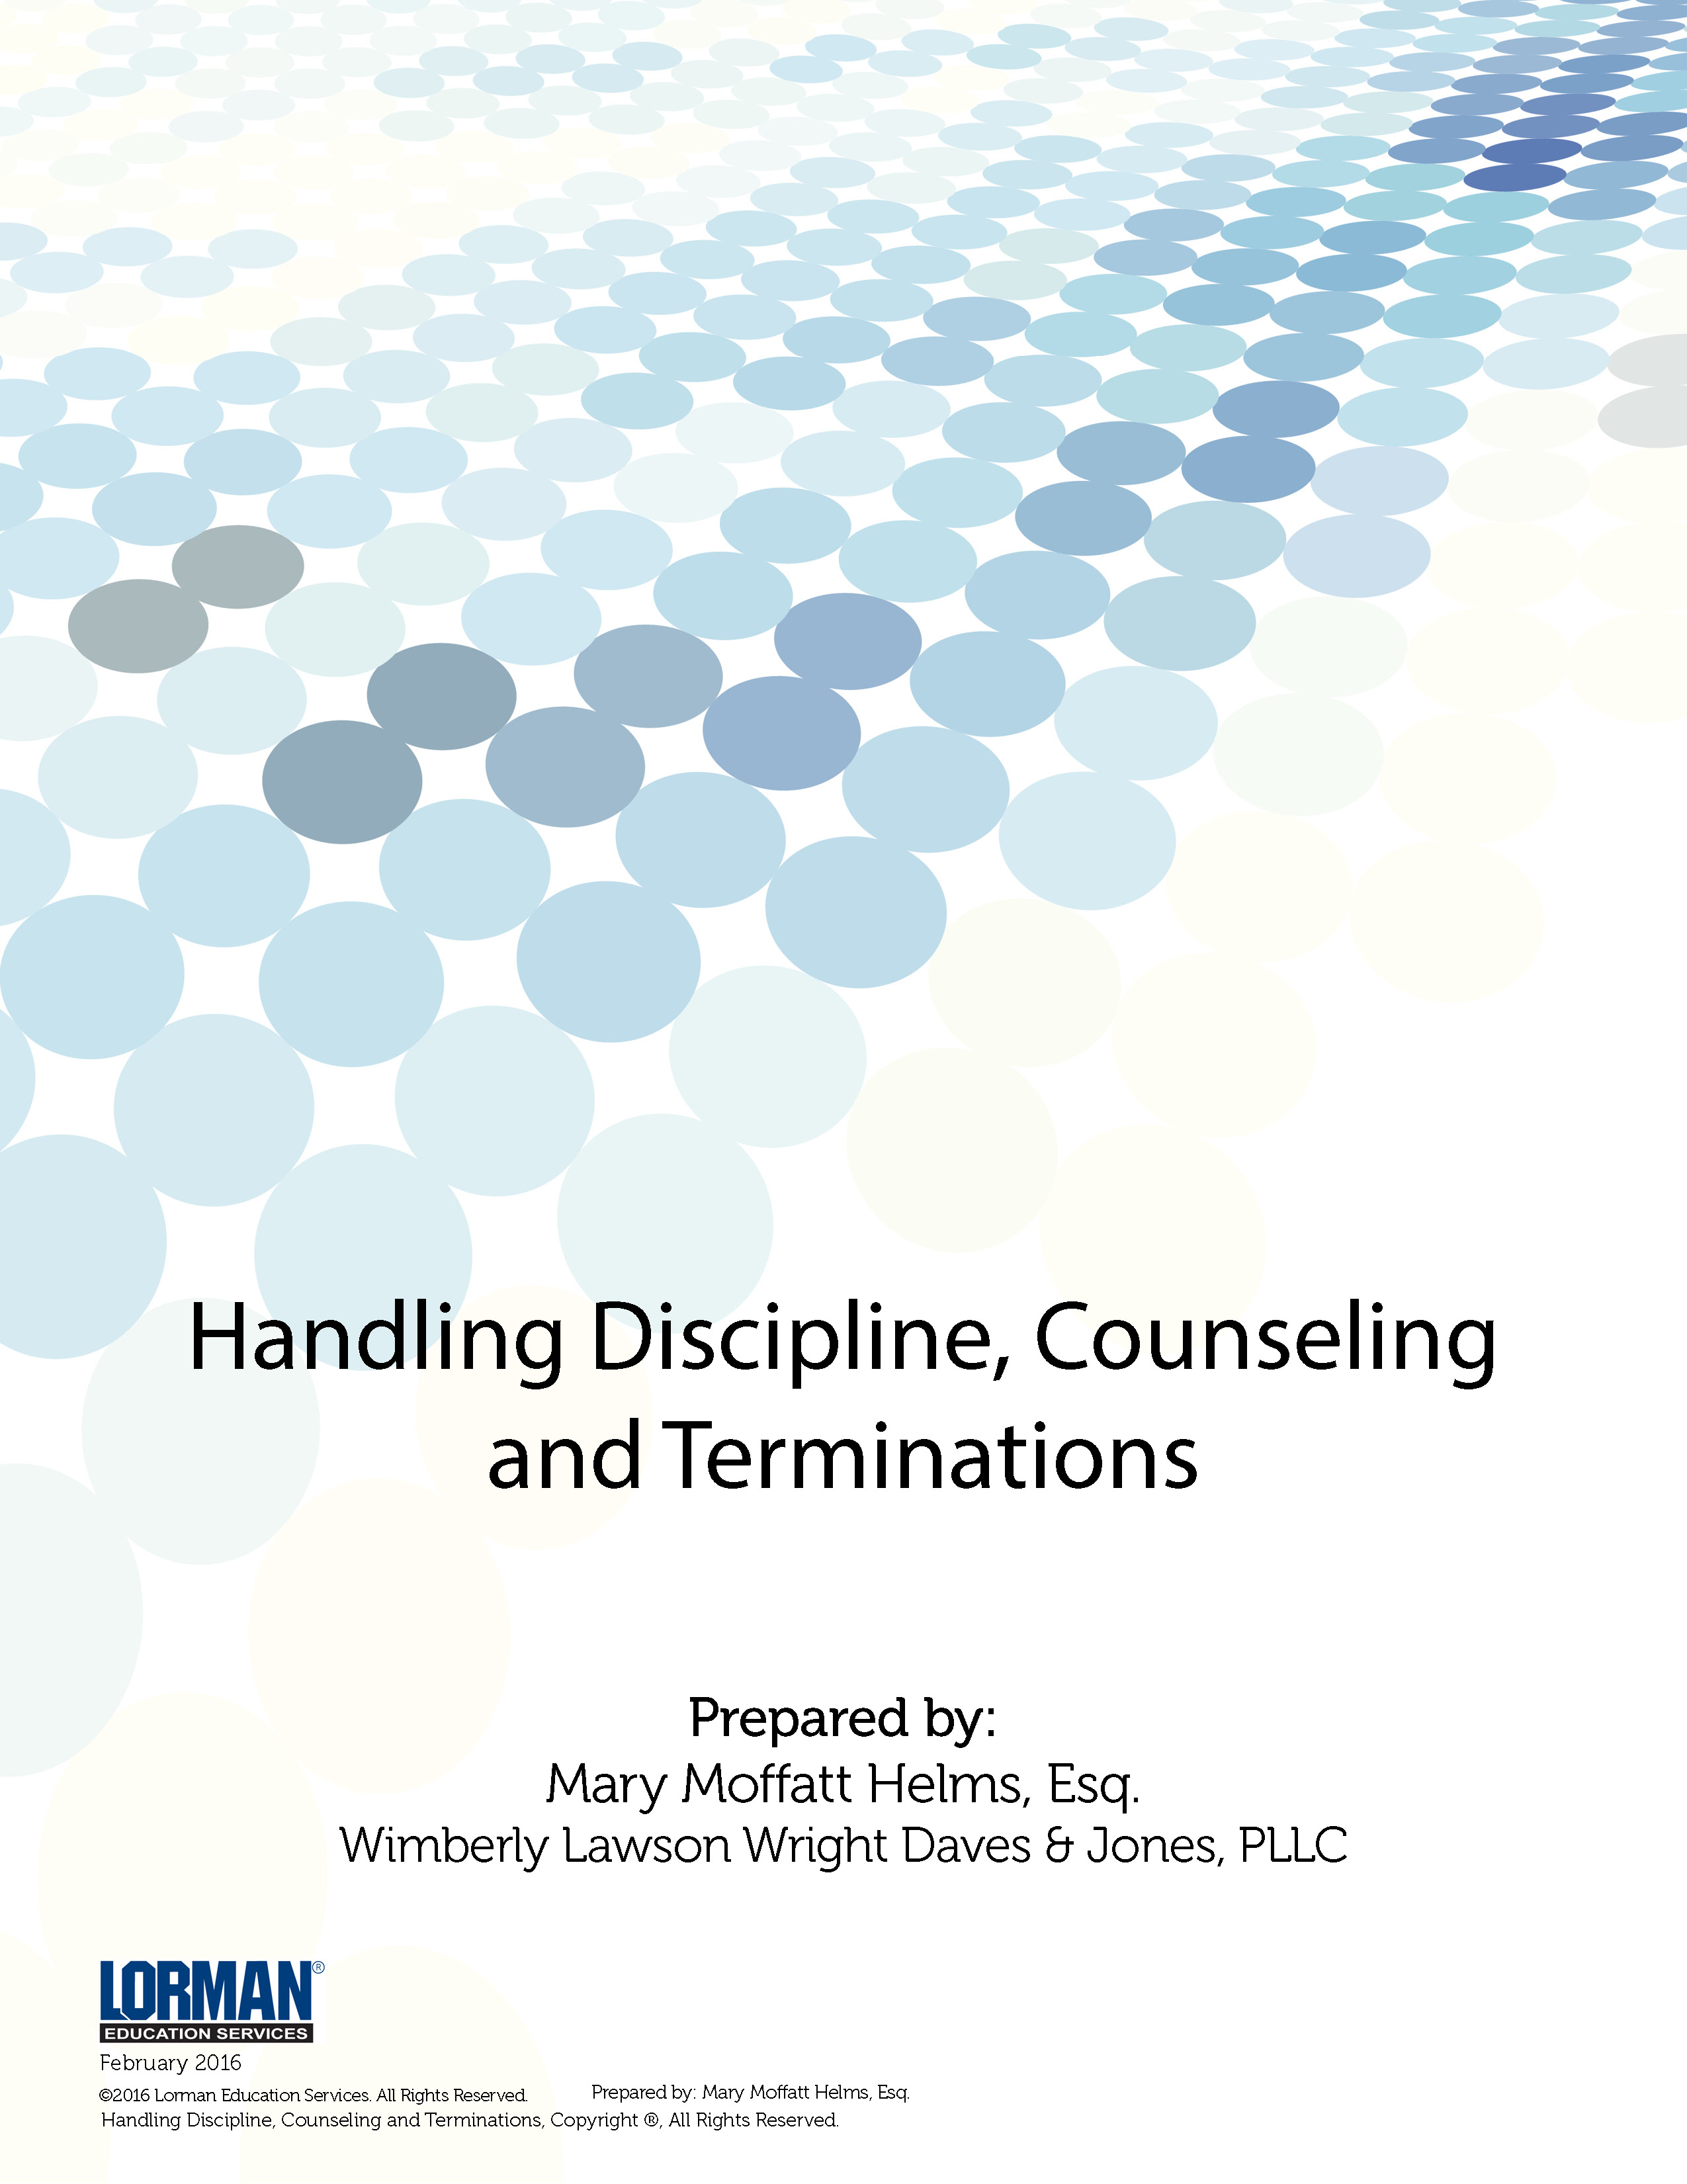 Handling Discipline, Counseling and Terminations